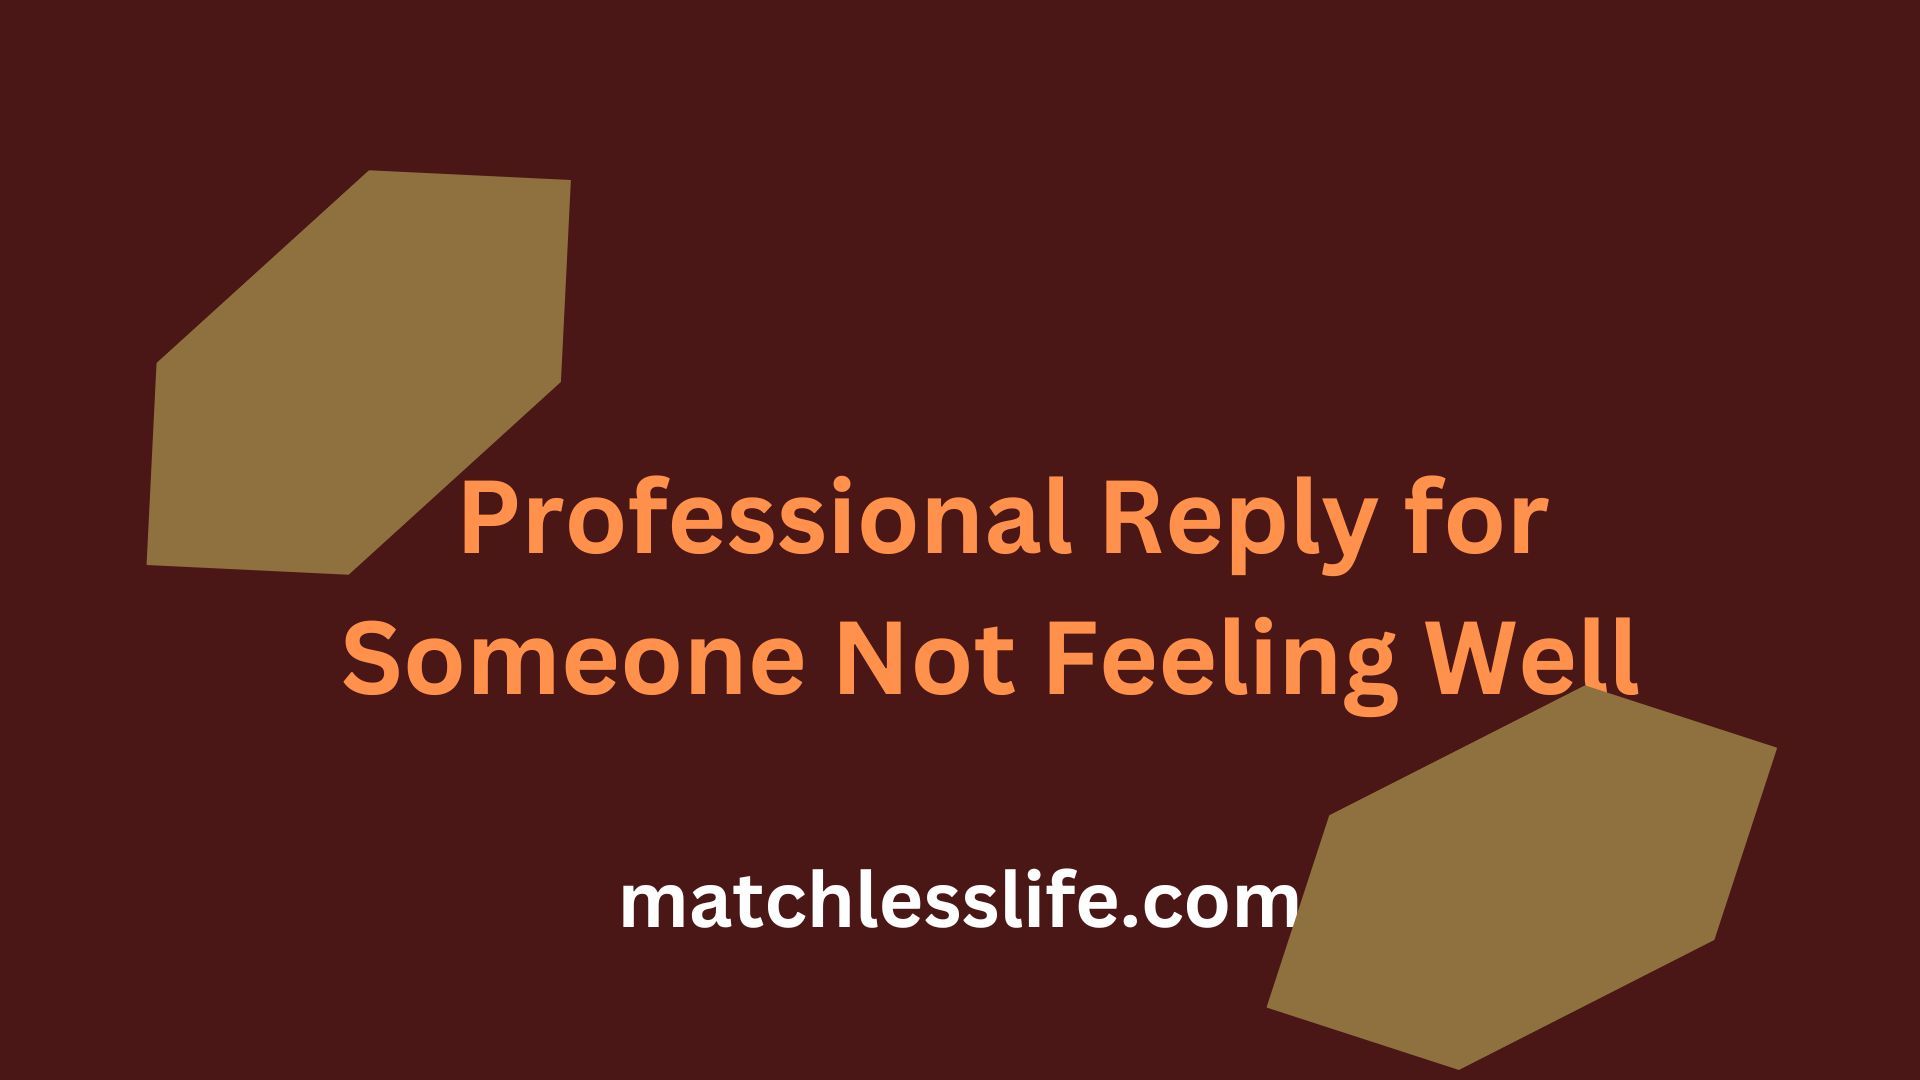 How To Reply If Someone Is Not Feeling Well Professionally